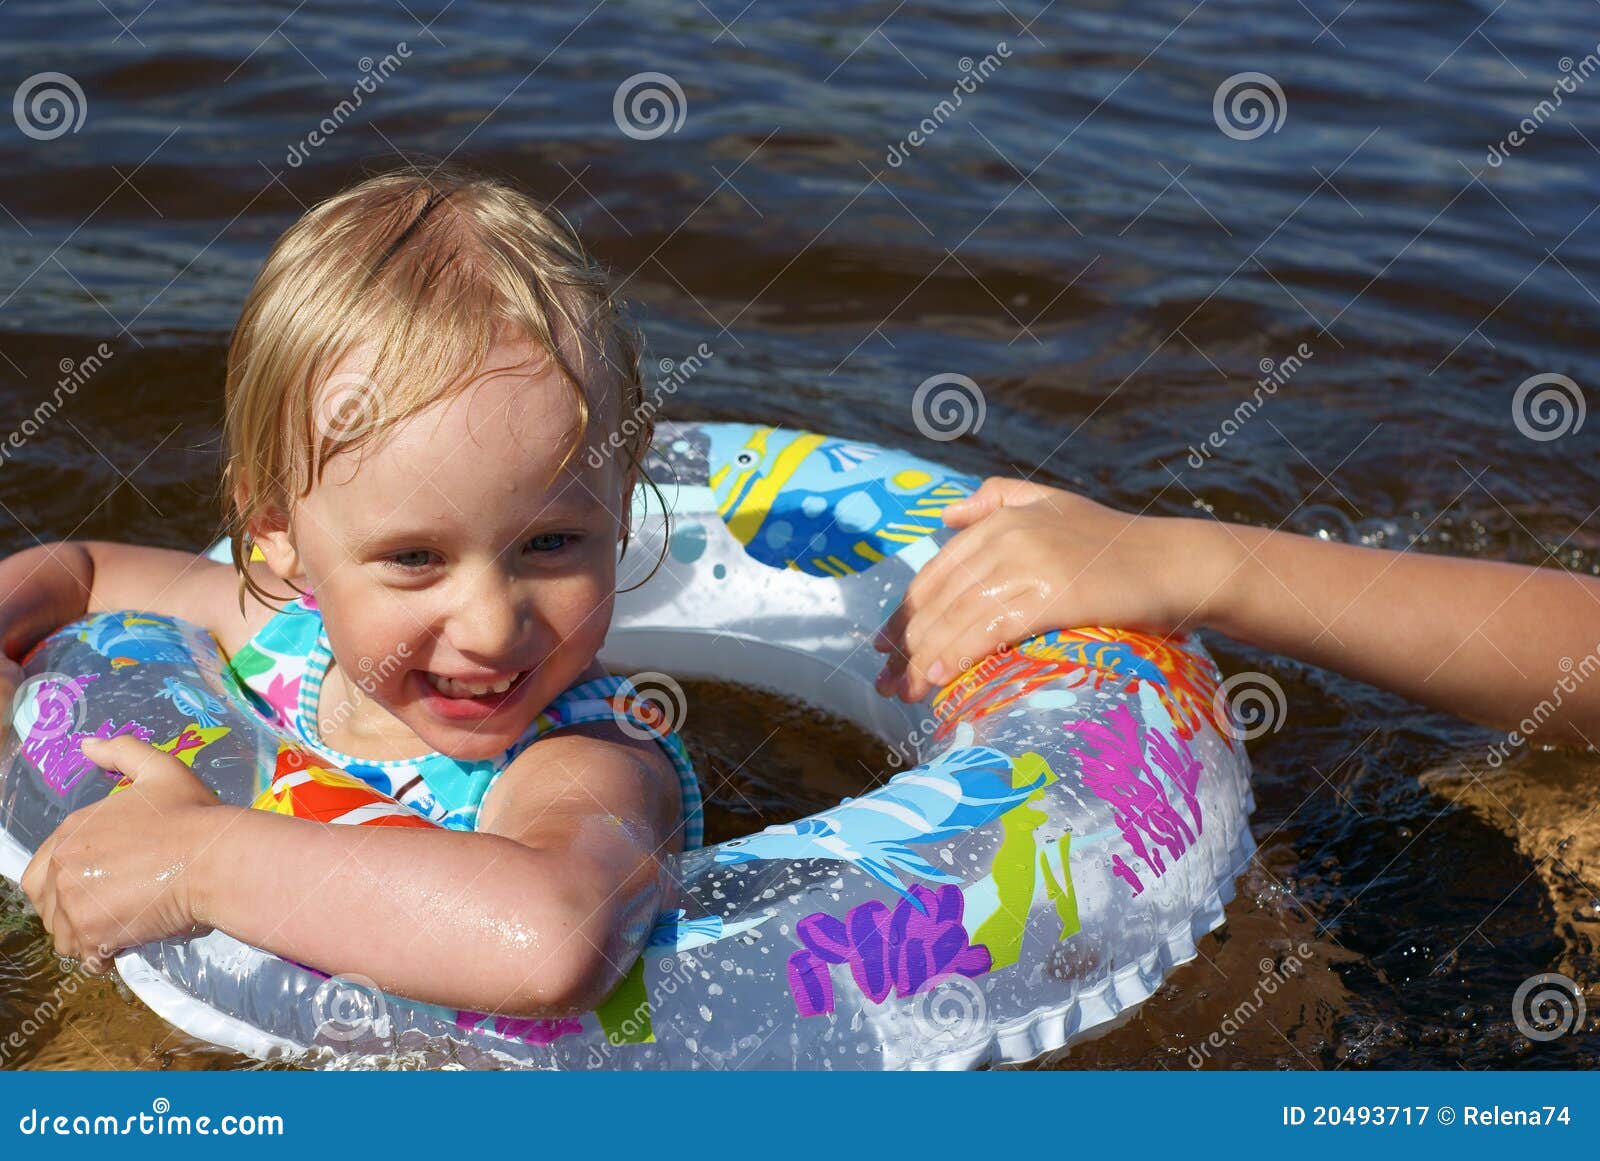 Happy girl in the river stock image. Image of summer - 20493717